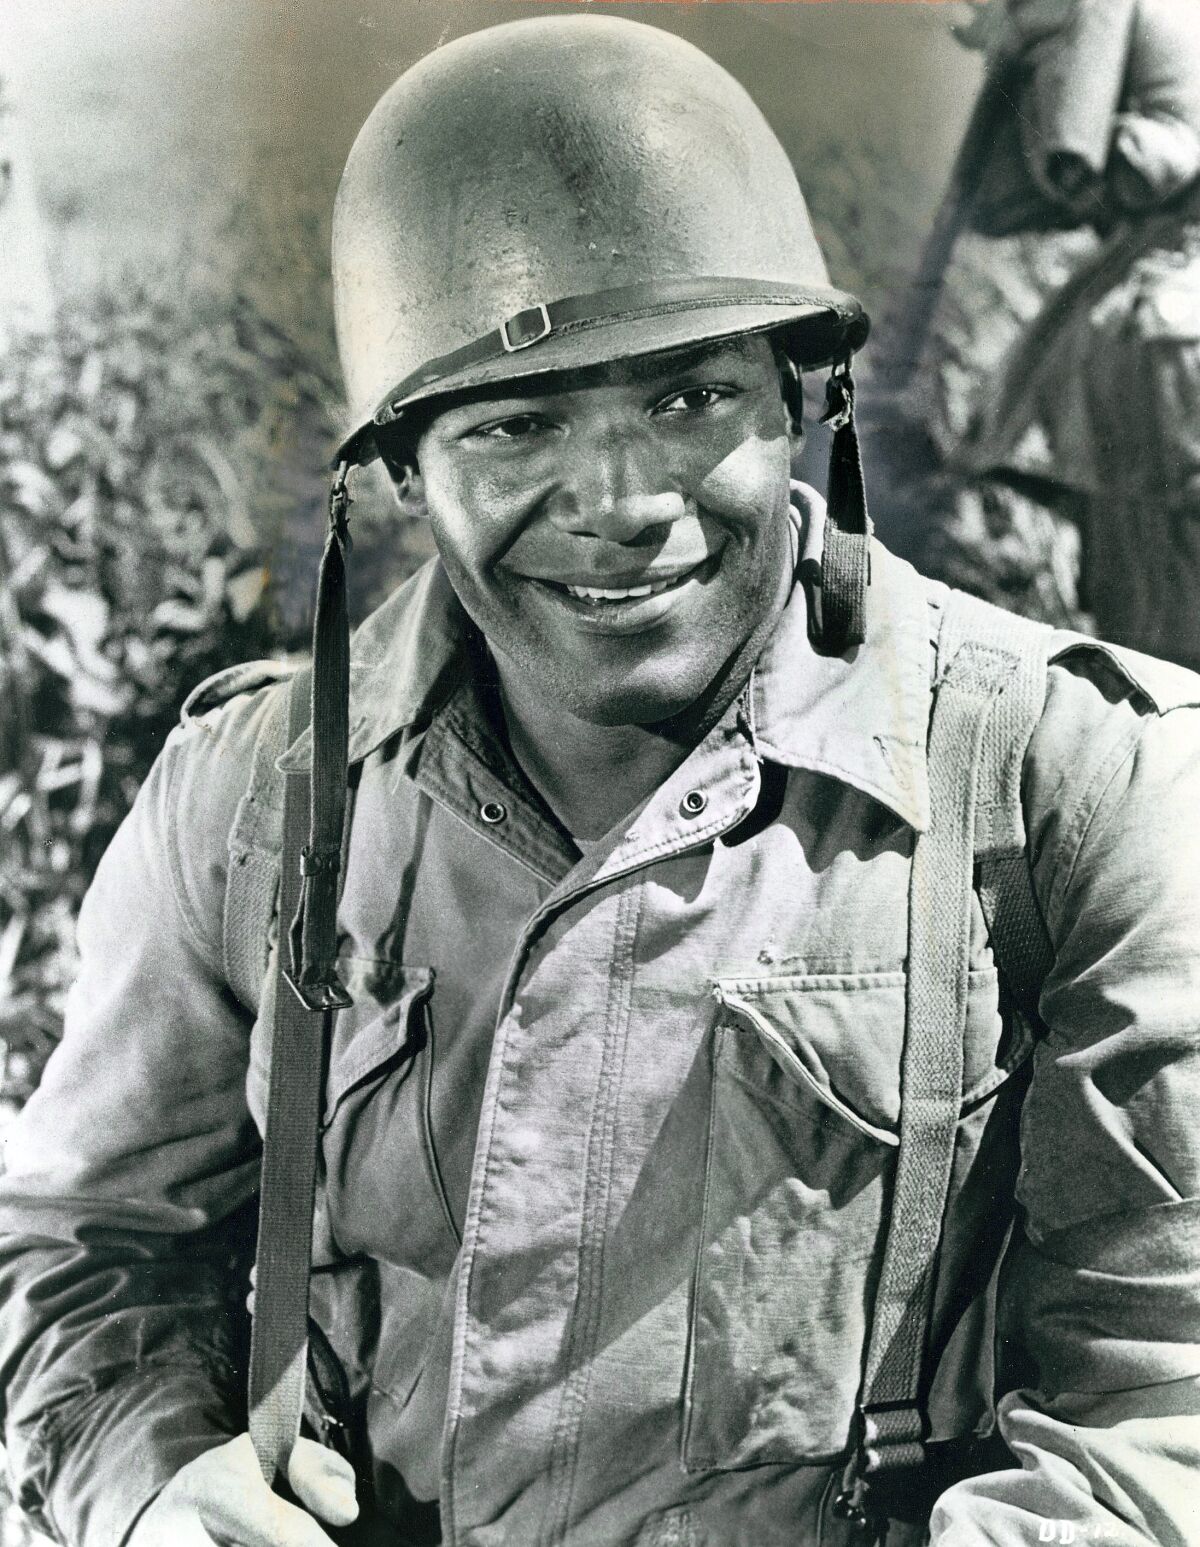 black and white photo of man in uniform and helmet 